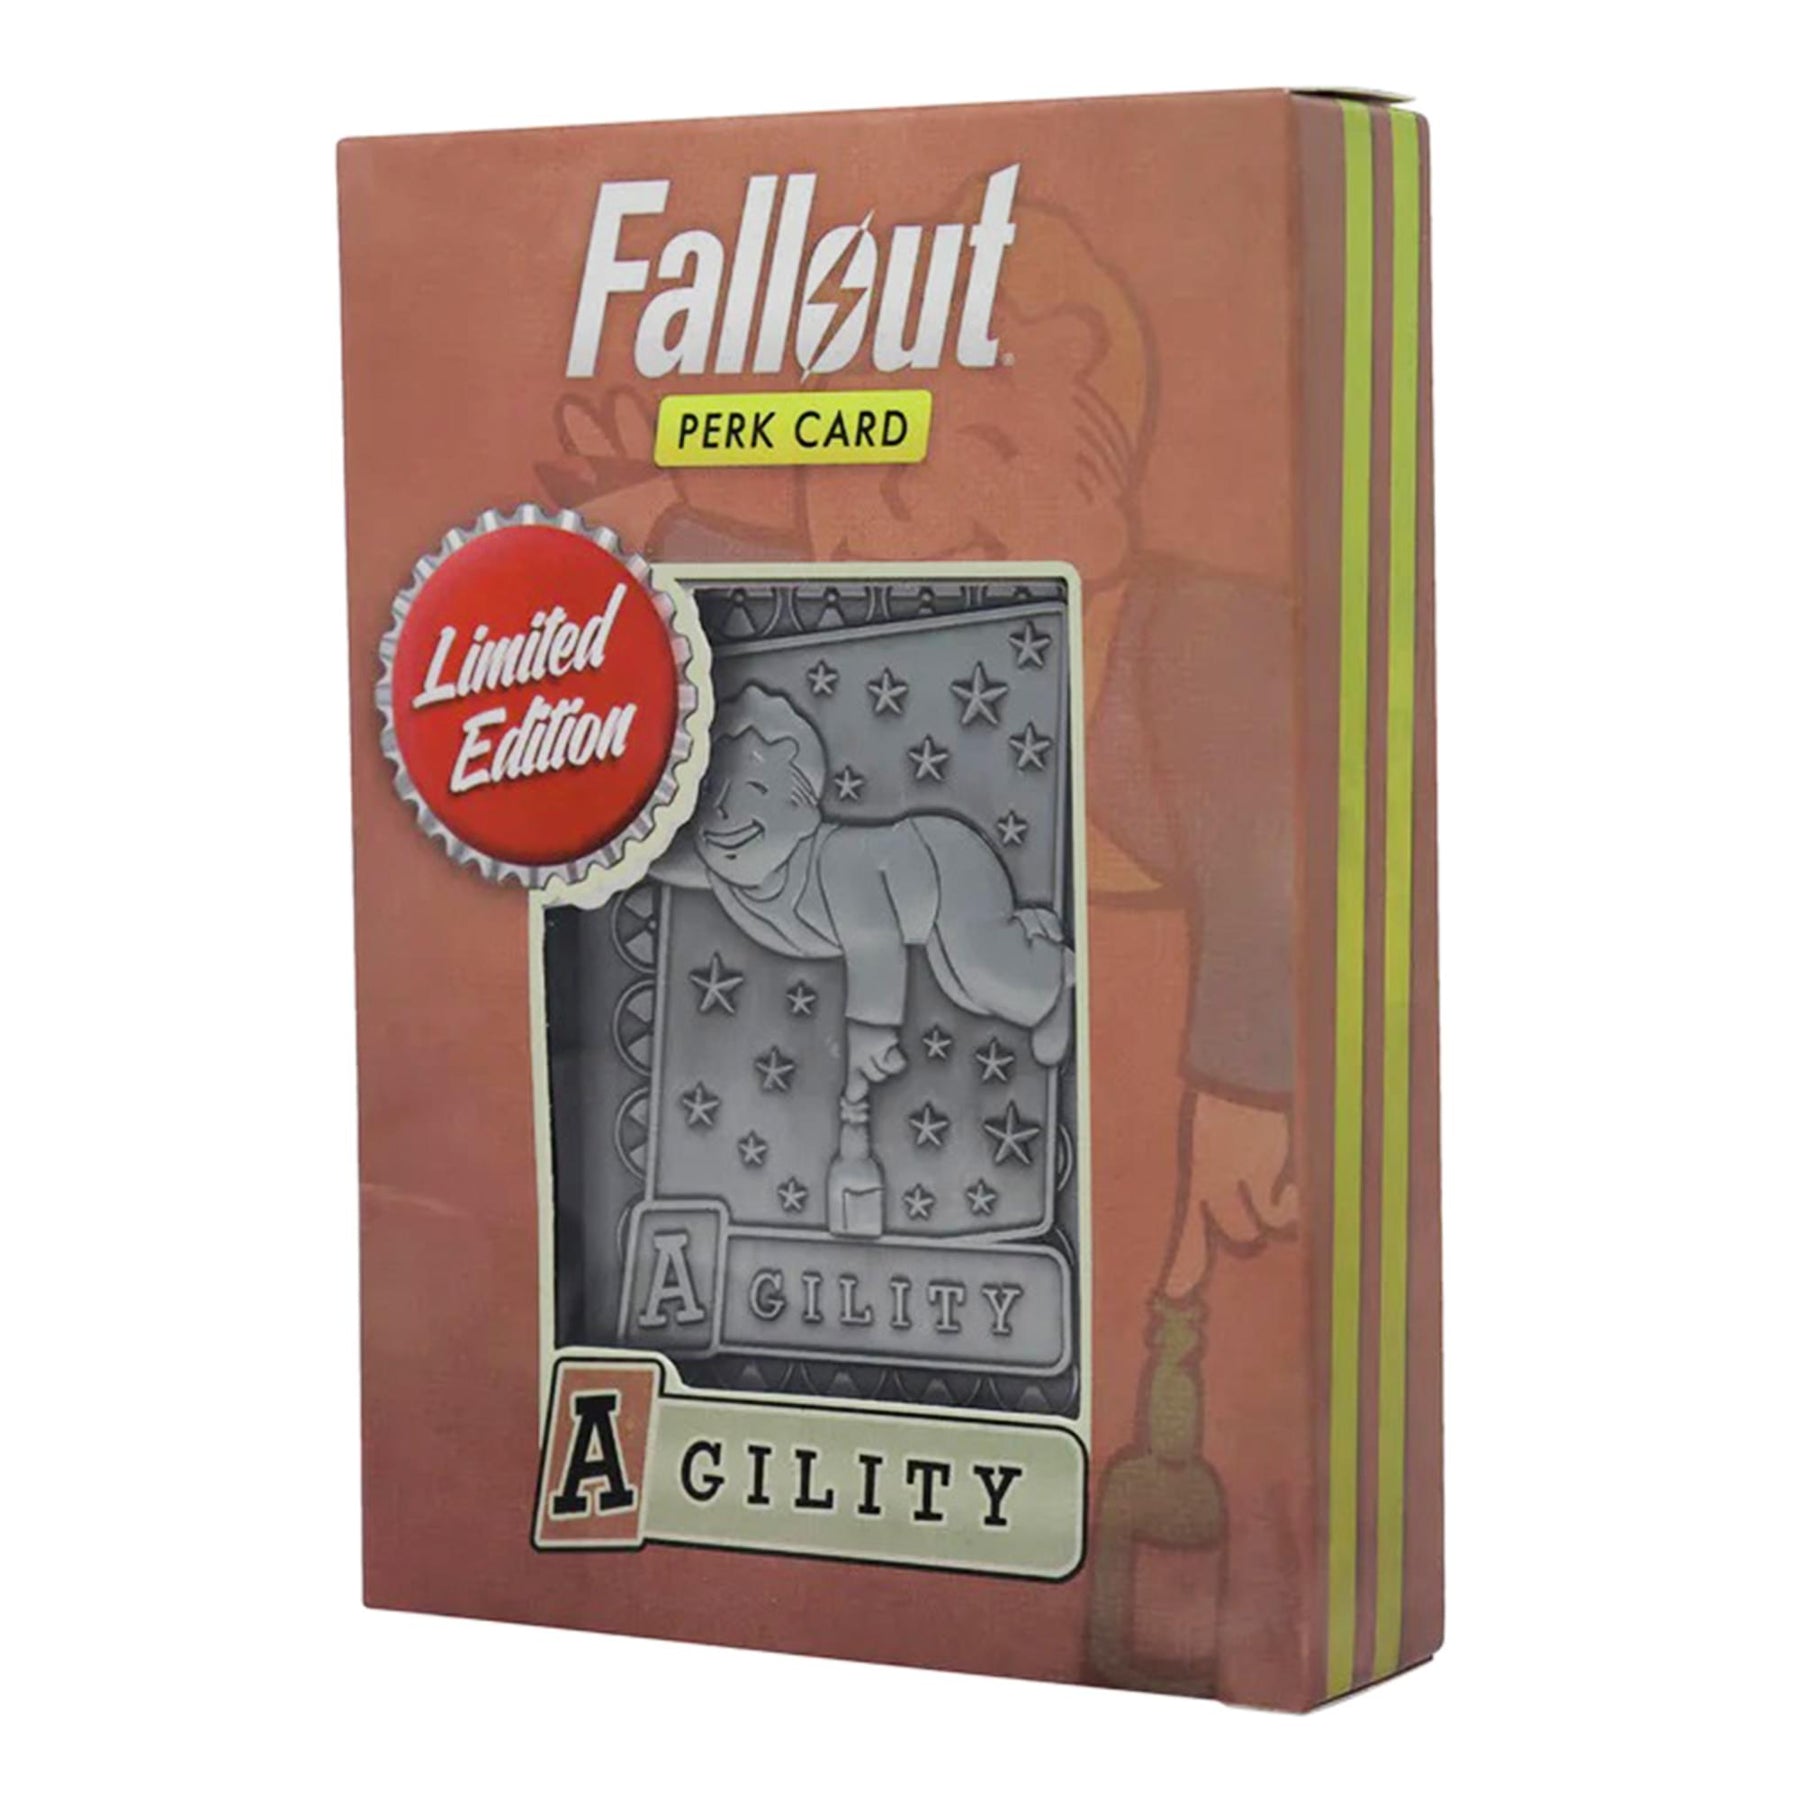 Fallout Limited Edition Replica Perk Card | Agility